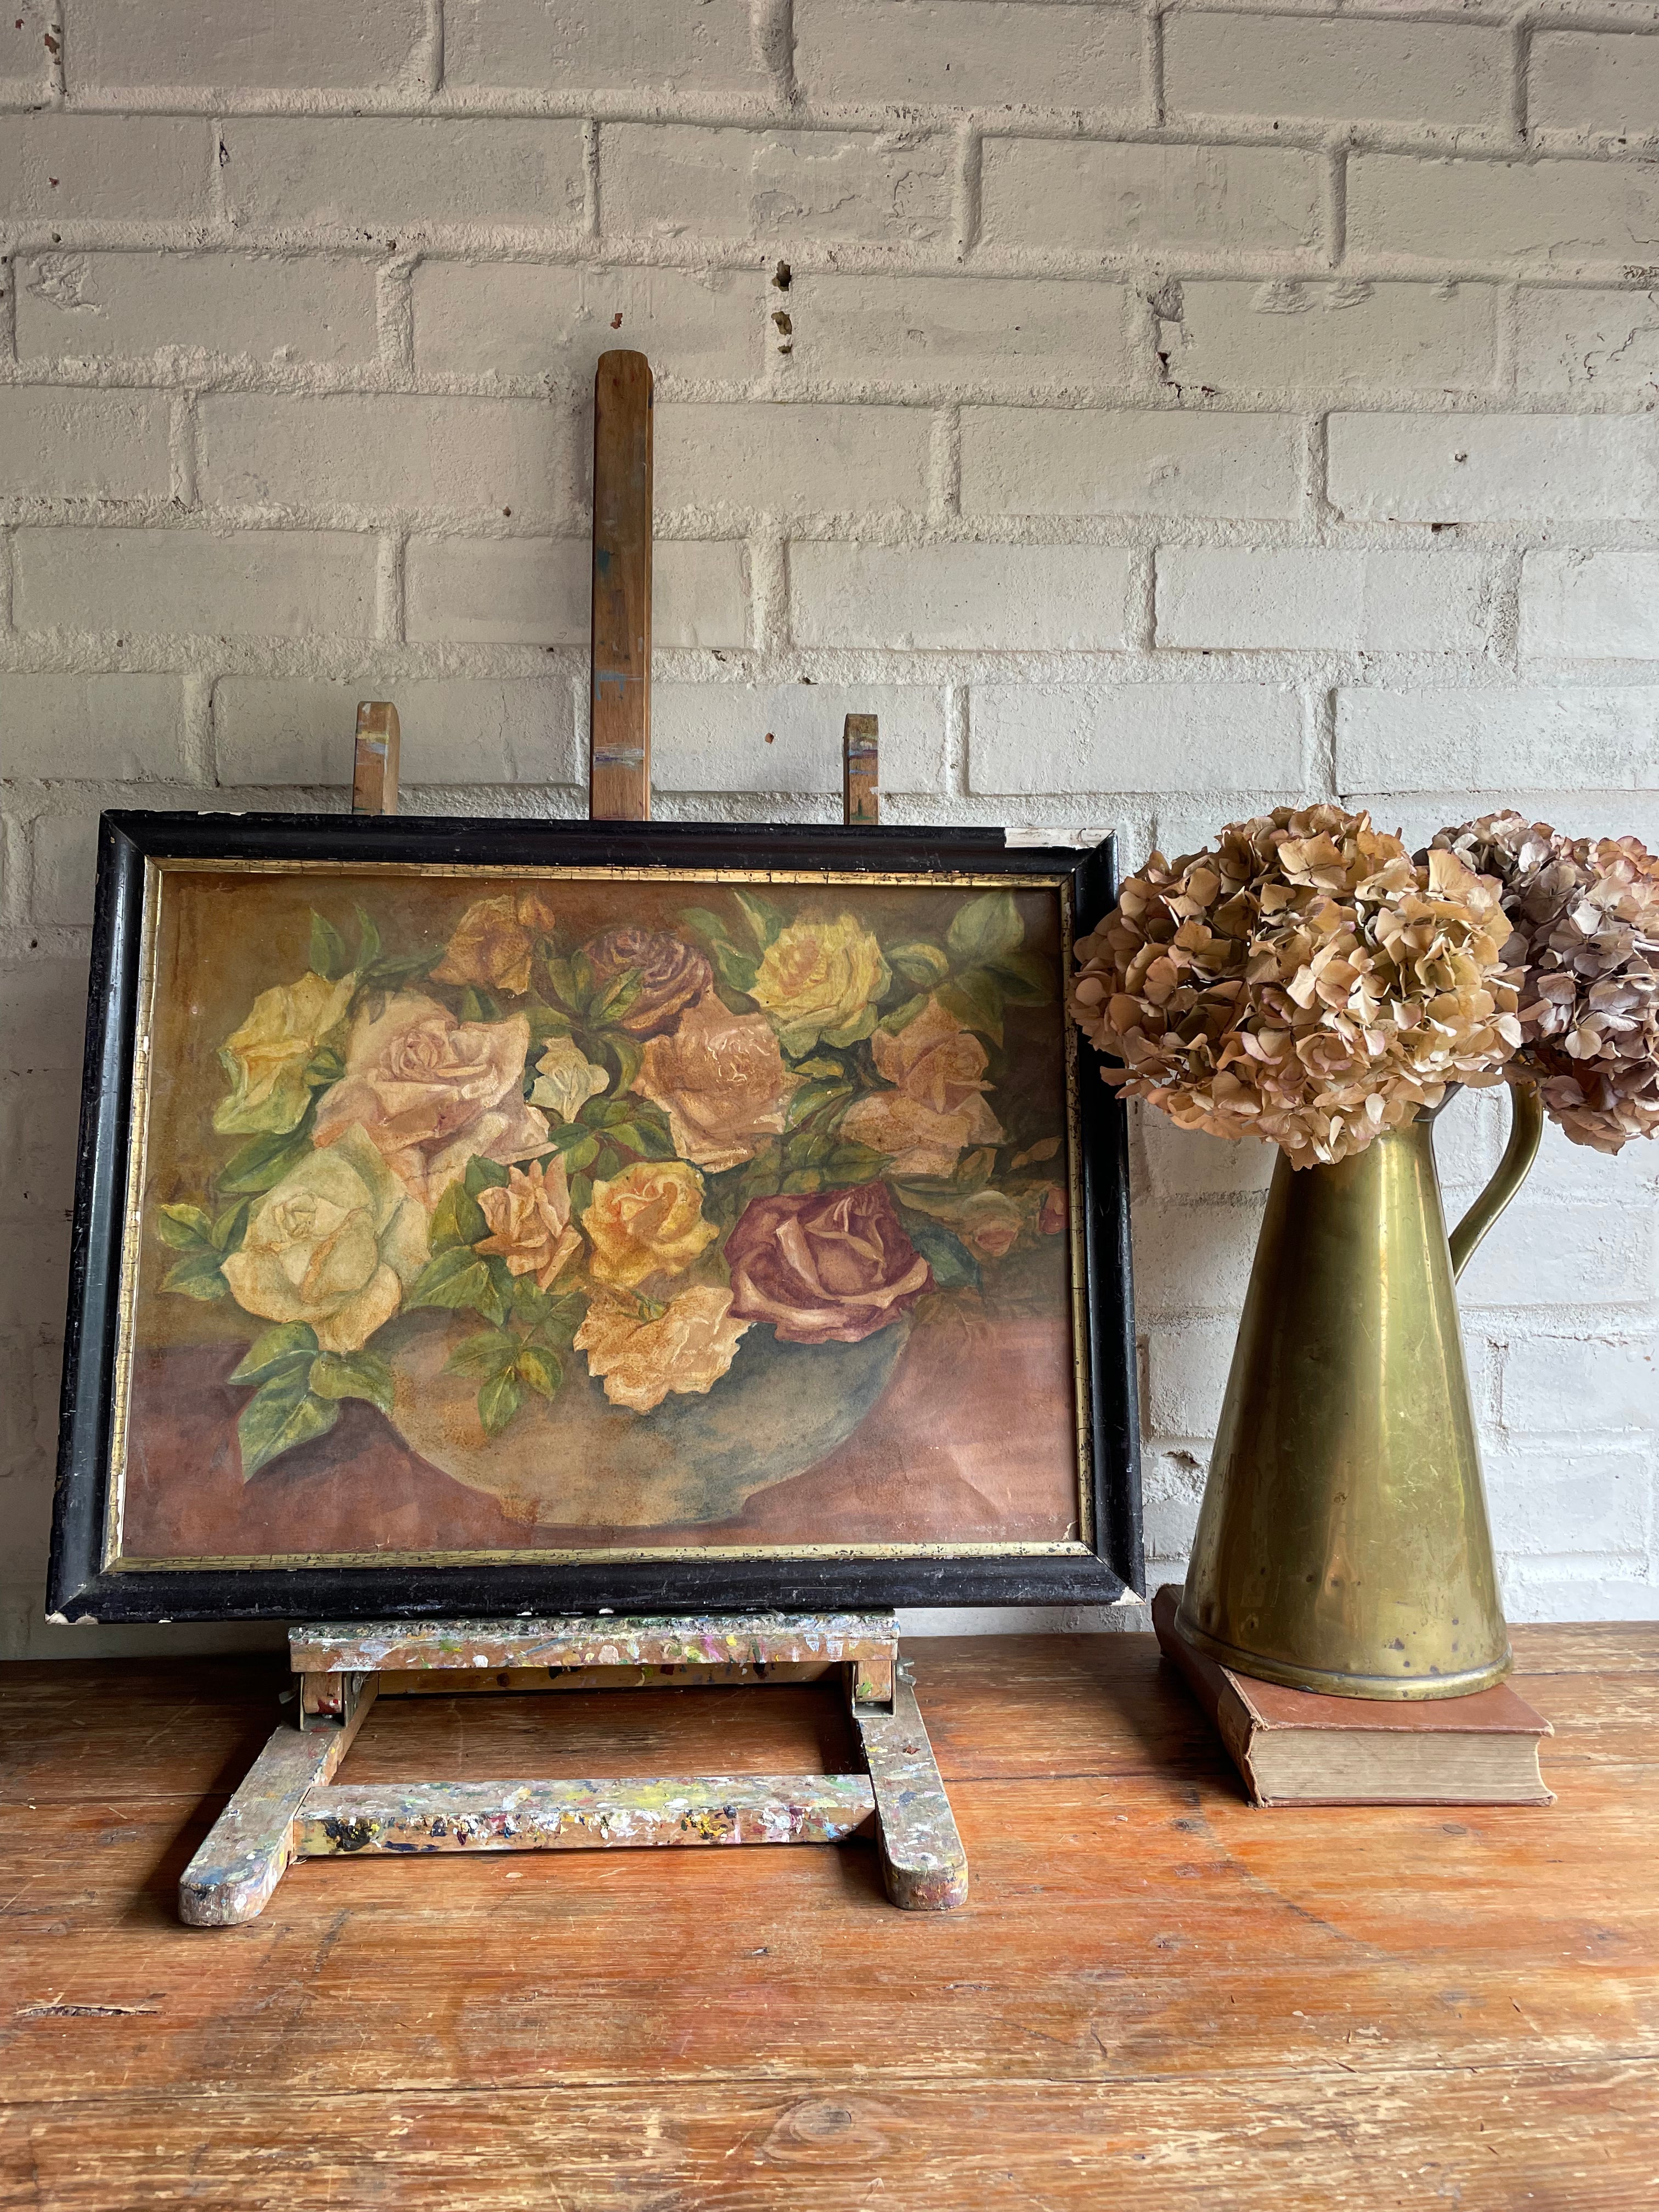 Muted Floral Still Life: Oil on CardBoard